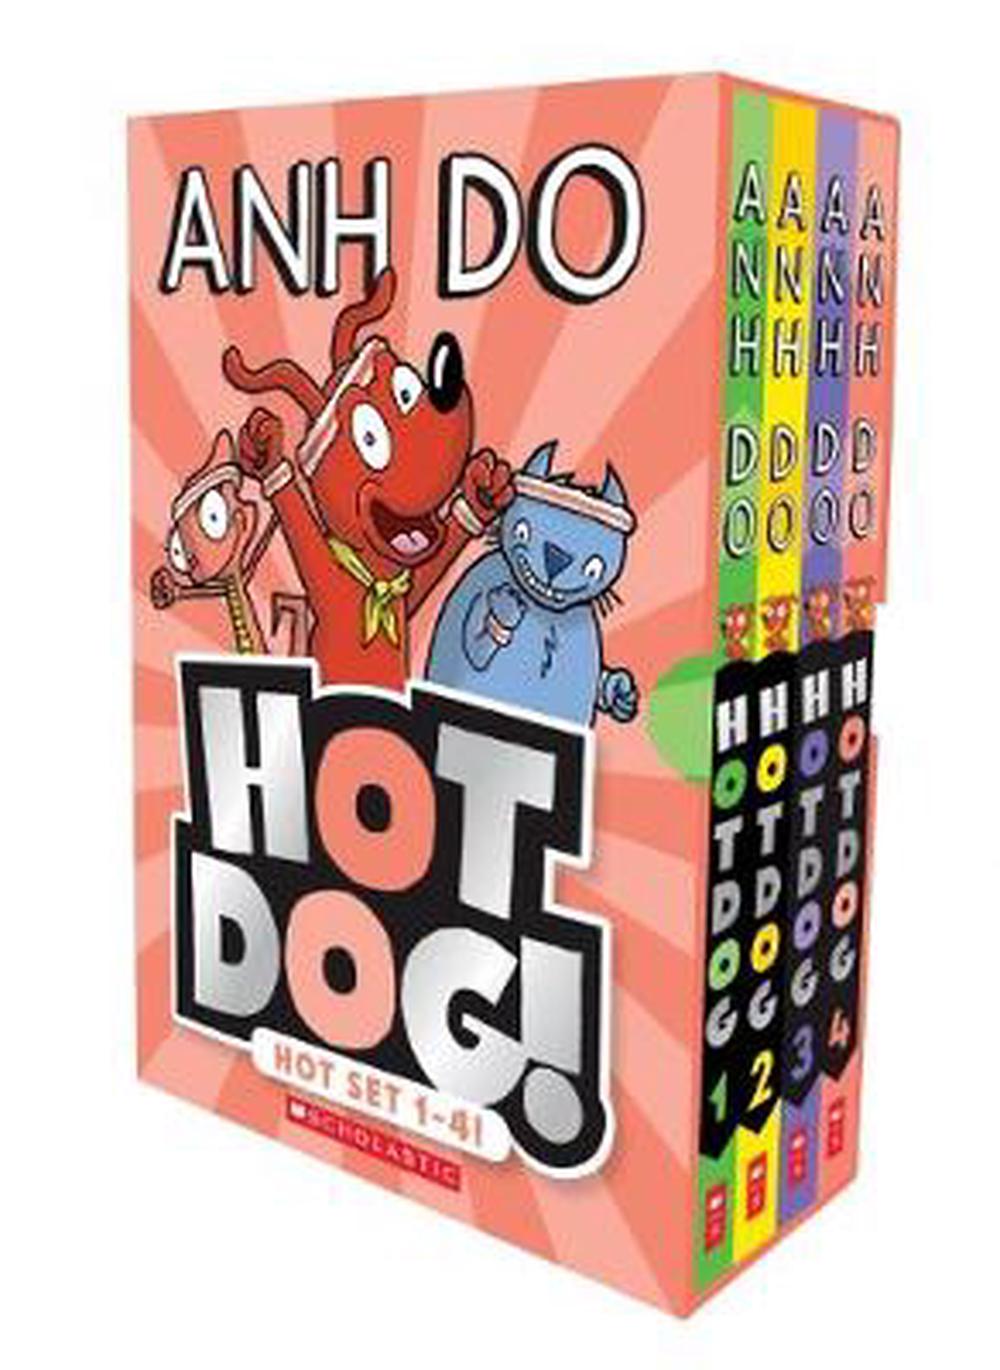 83 List Anh Do Hot Dog Books for Learn